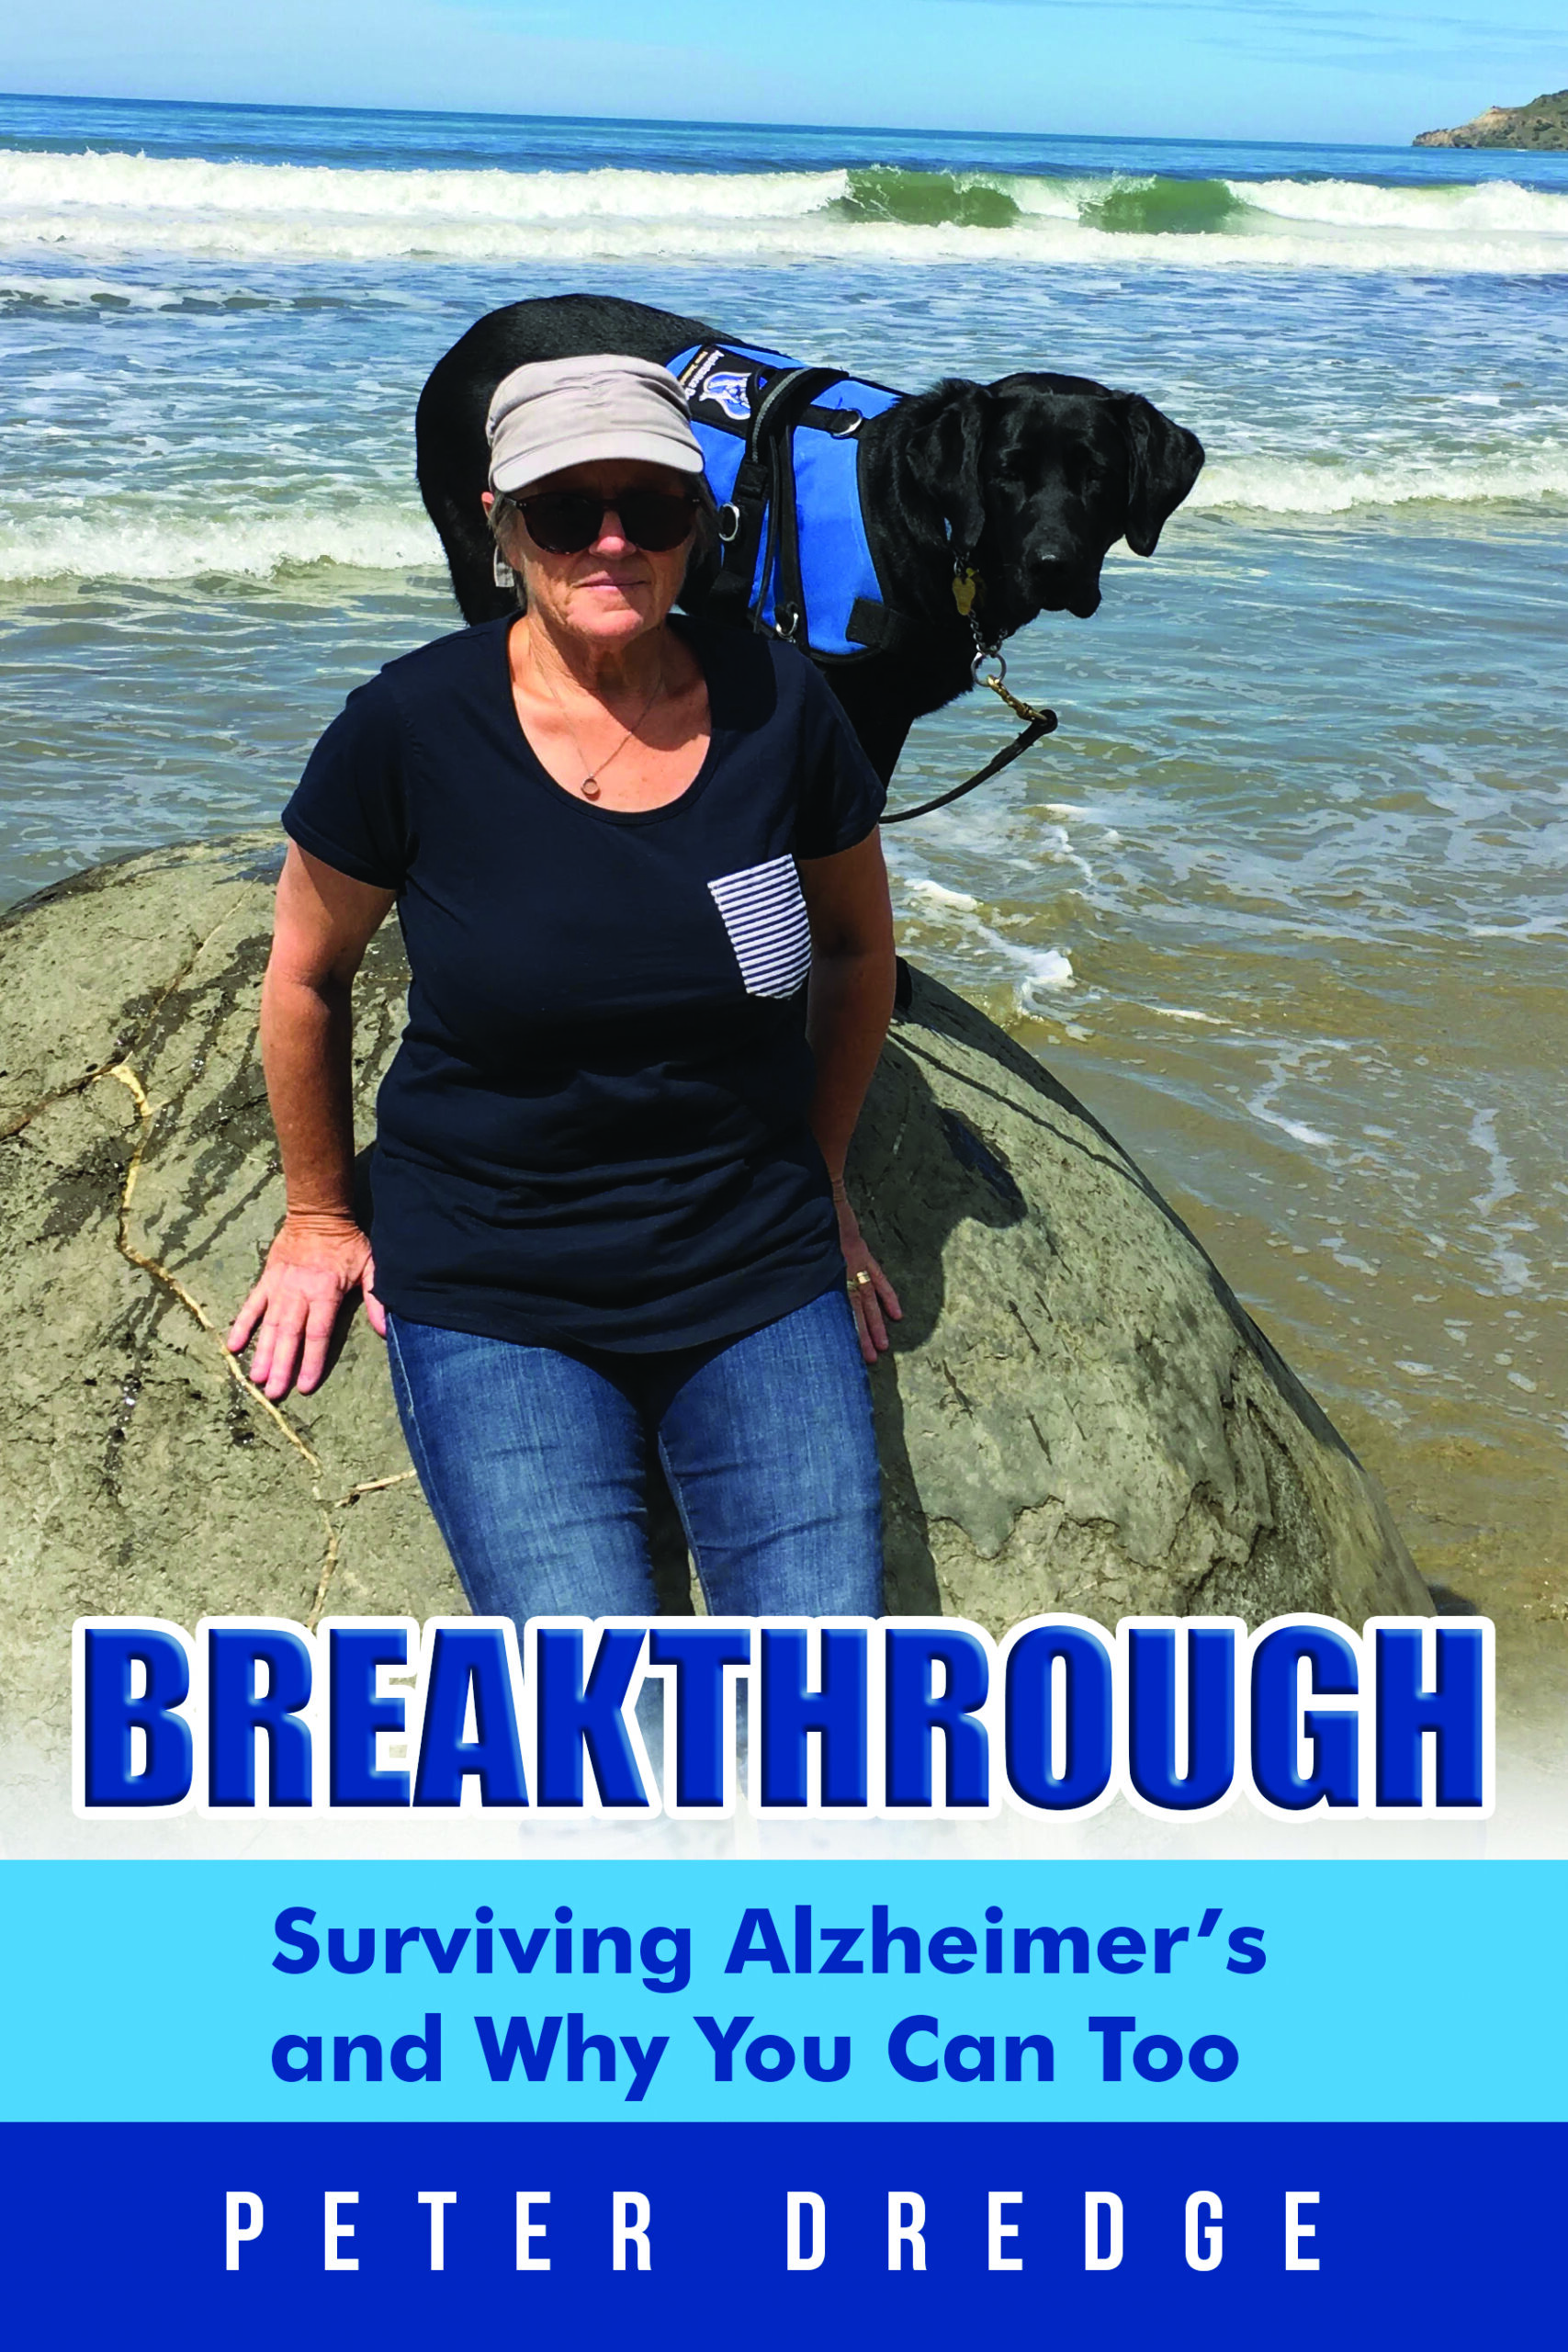 FREE: Breakthrough : Surviving Alzheimer’s and Why You Can Too by Peter Dredge